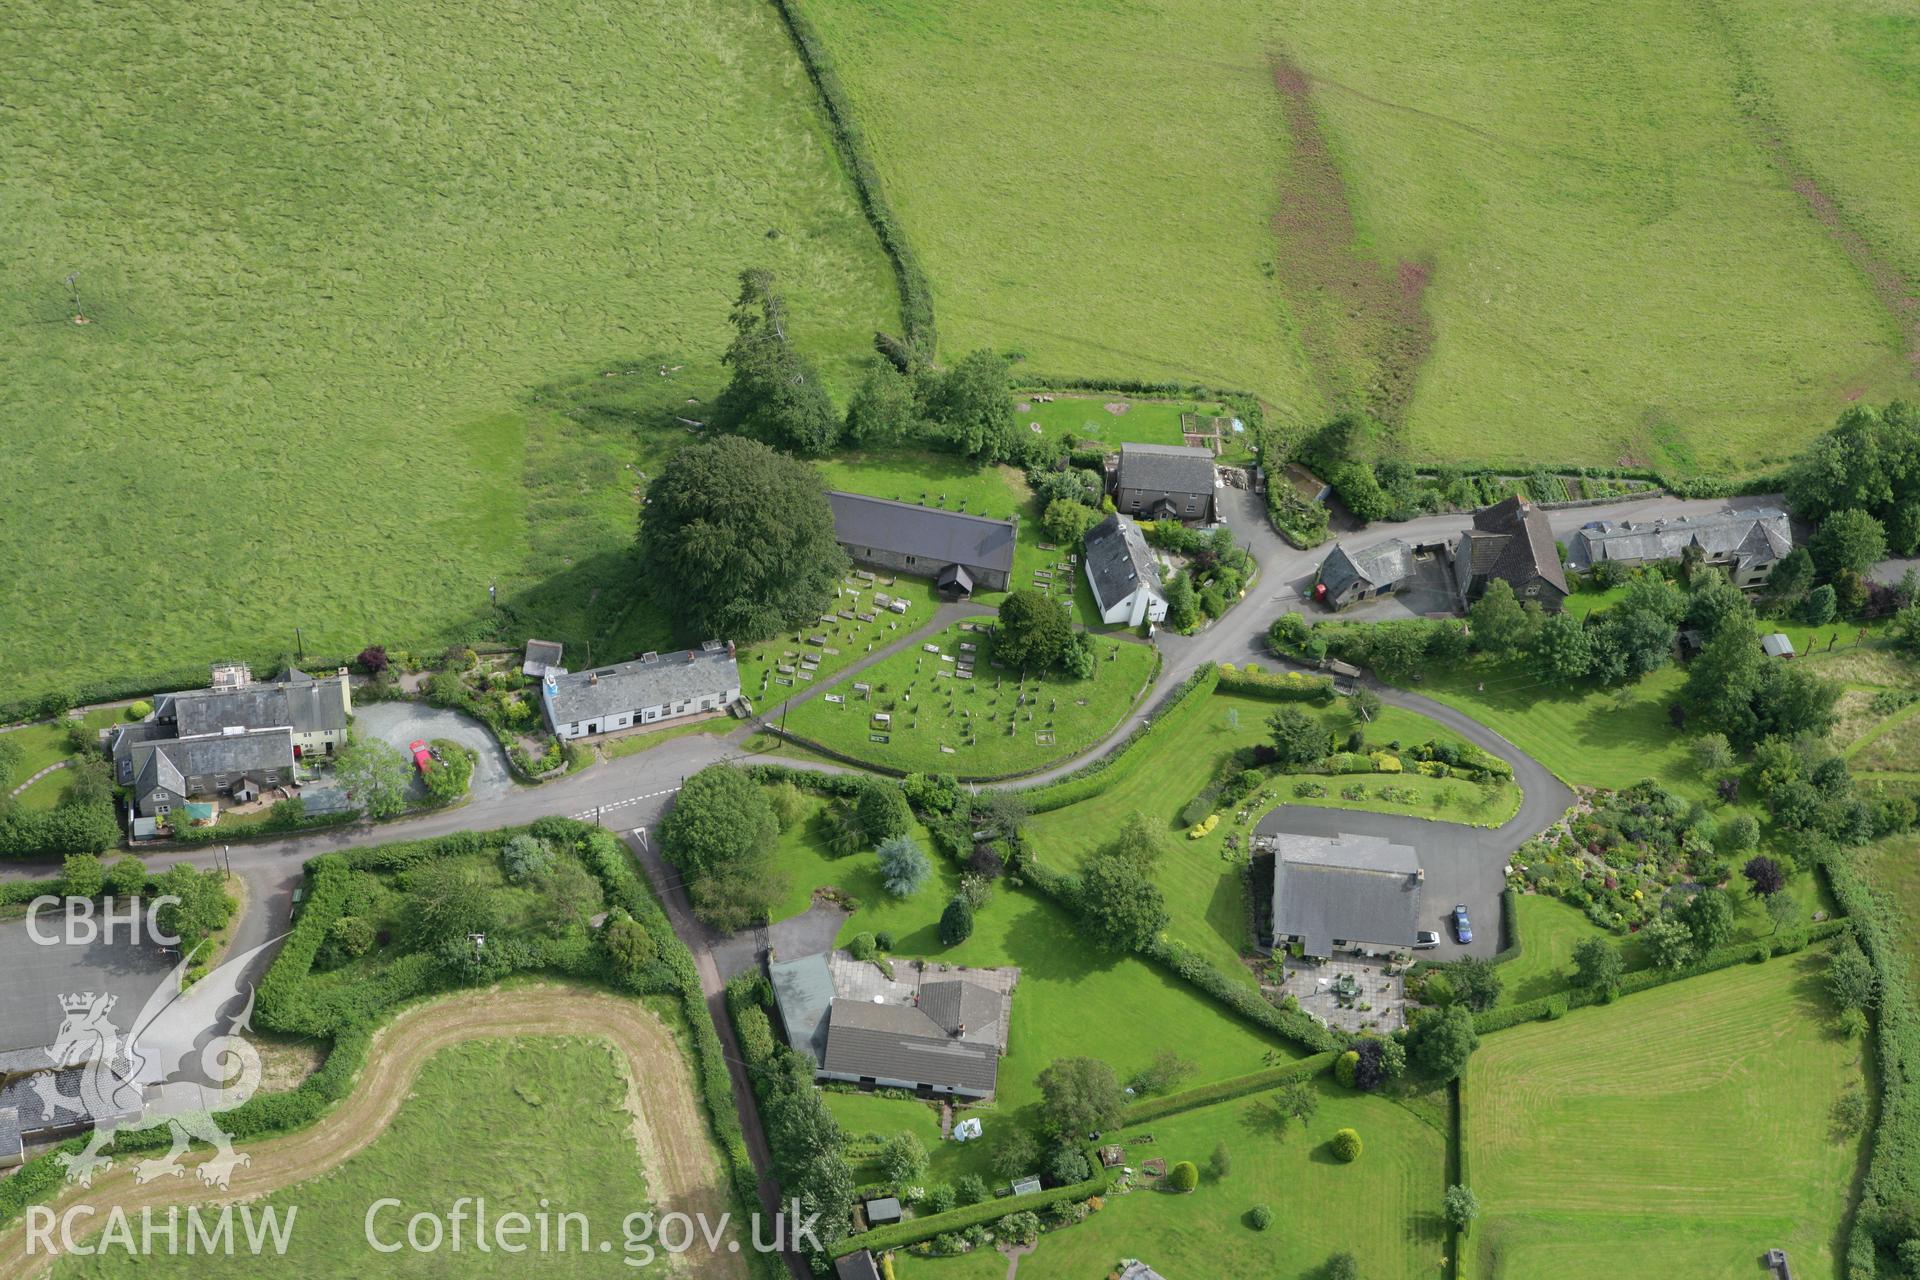 RCAHMW colour oblique aerial photograph of Trallong. Taken on 09 July 2007 by Toby Driver